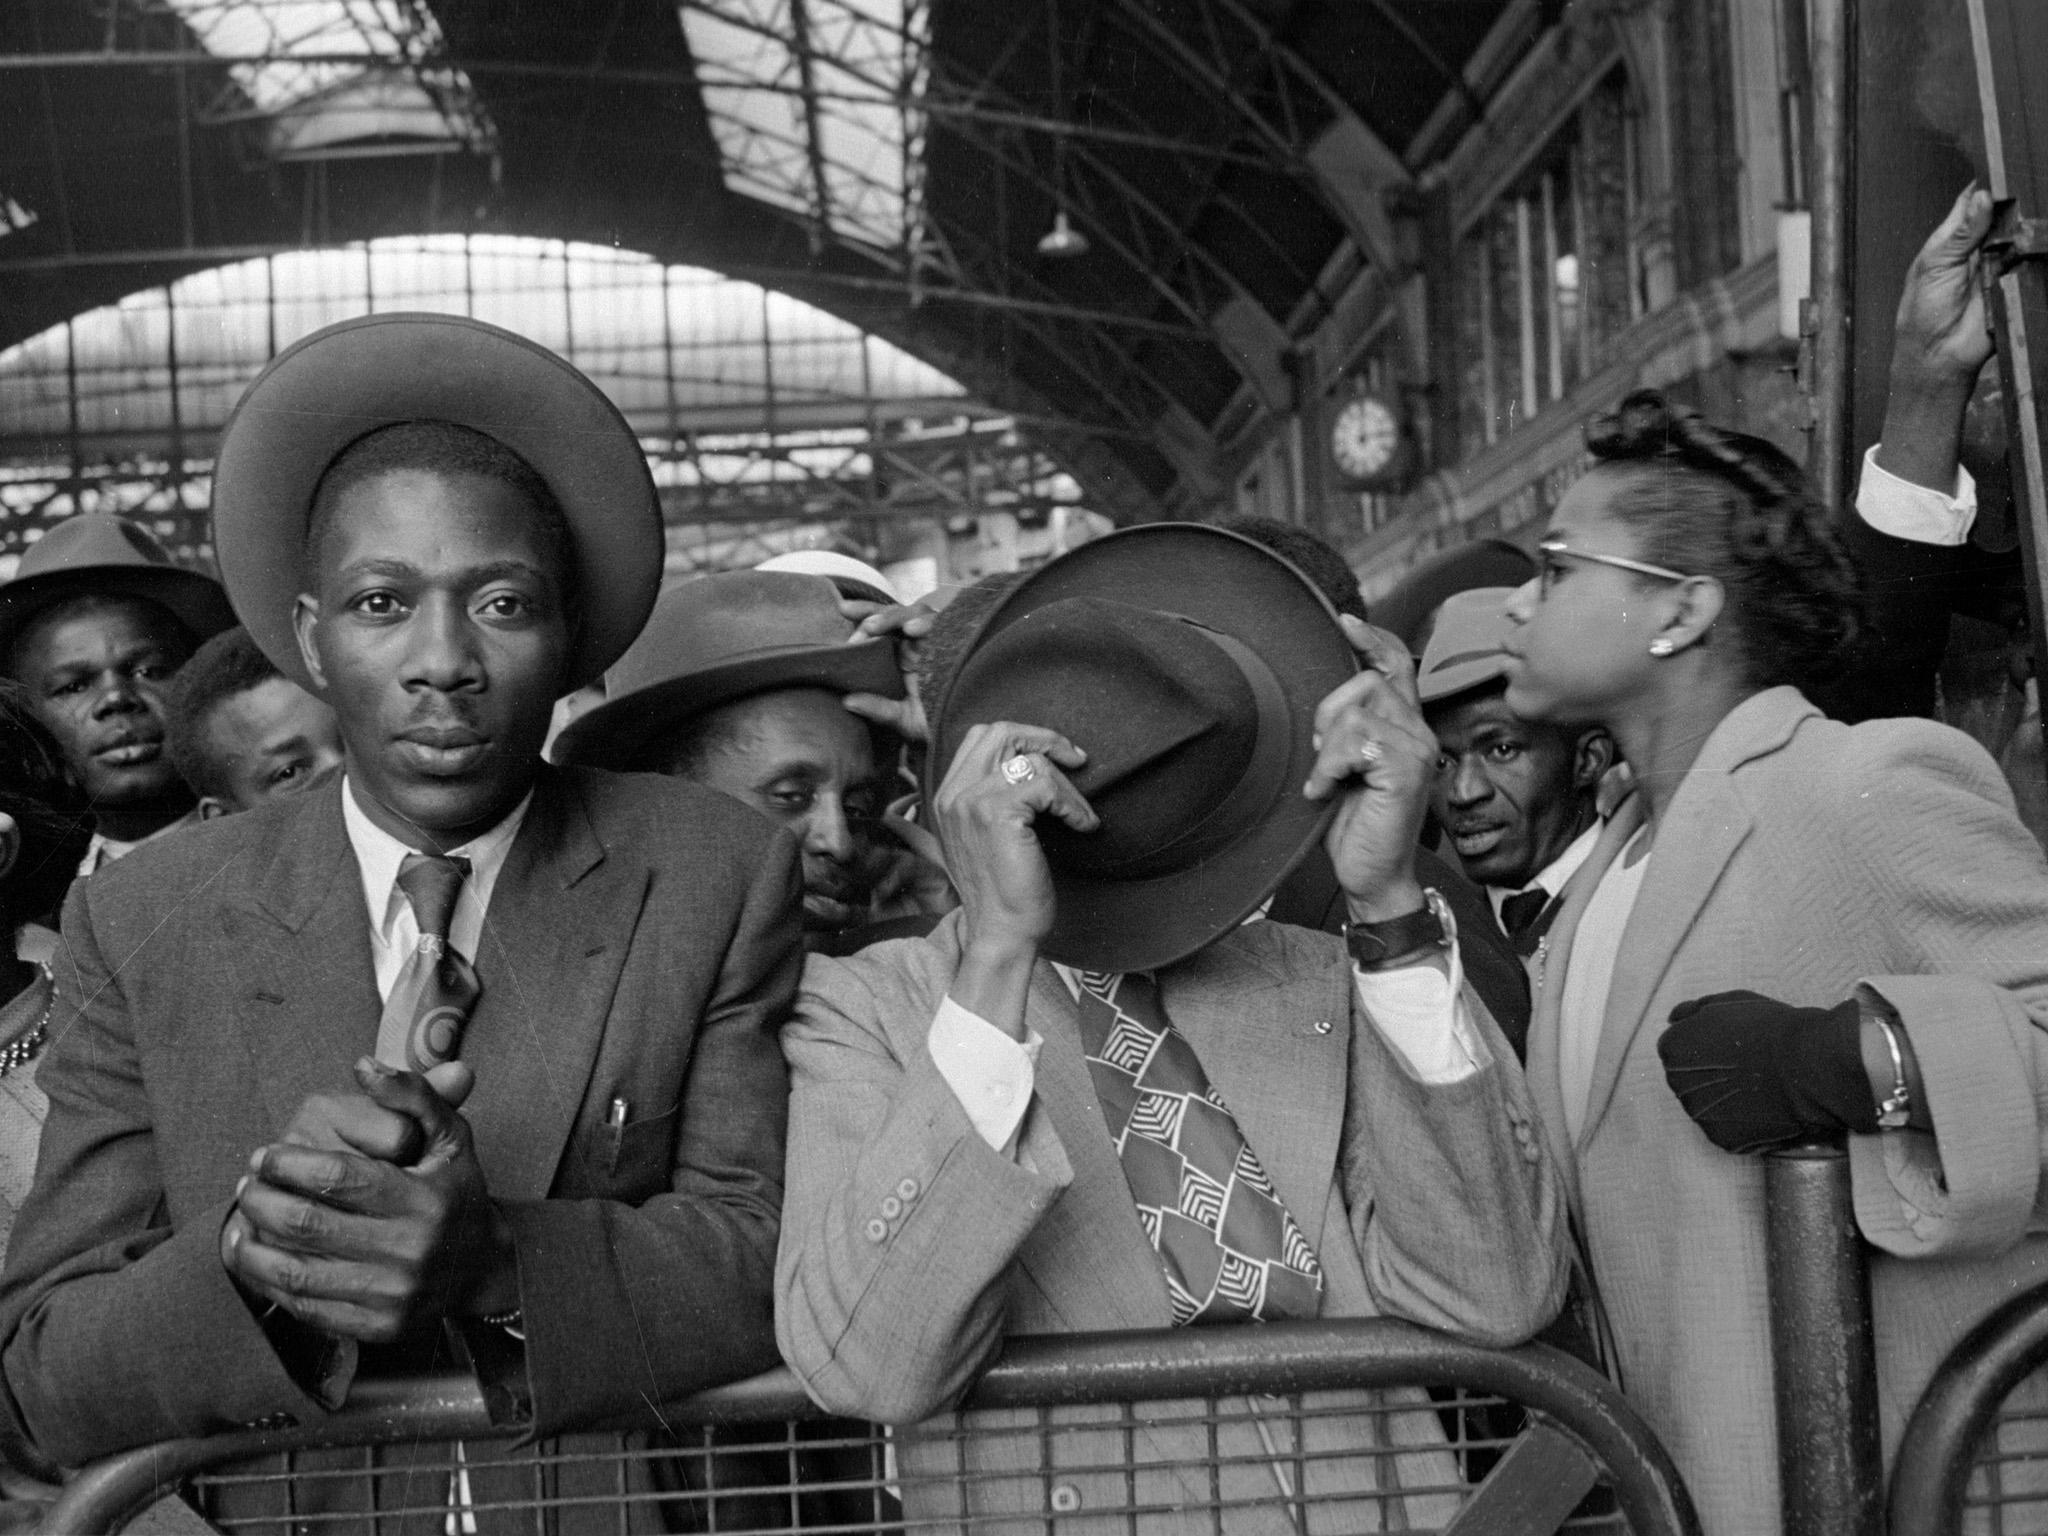 The Windrush scandal is evidence of increasing mistreatment of black migrants in this country